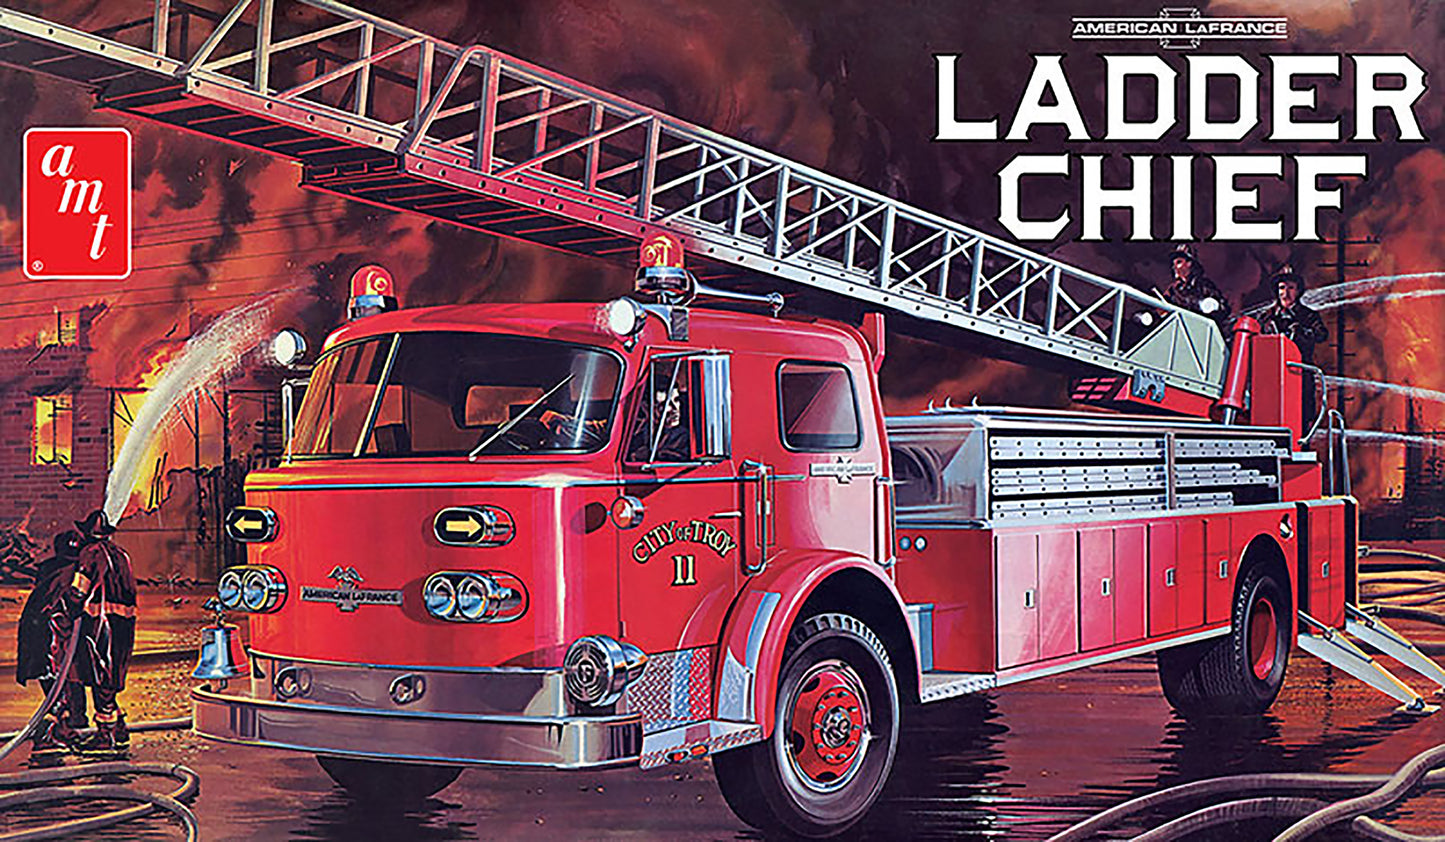 American LaFrance Ladder Chief 1000-Series Ladder Truck "City of Troy" (Model Kit)